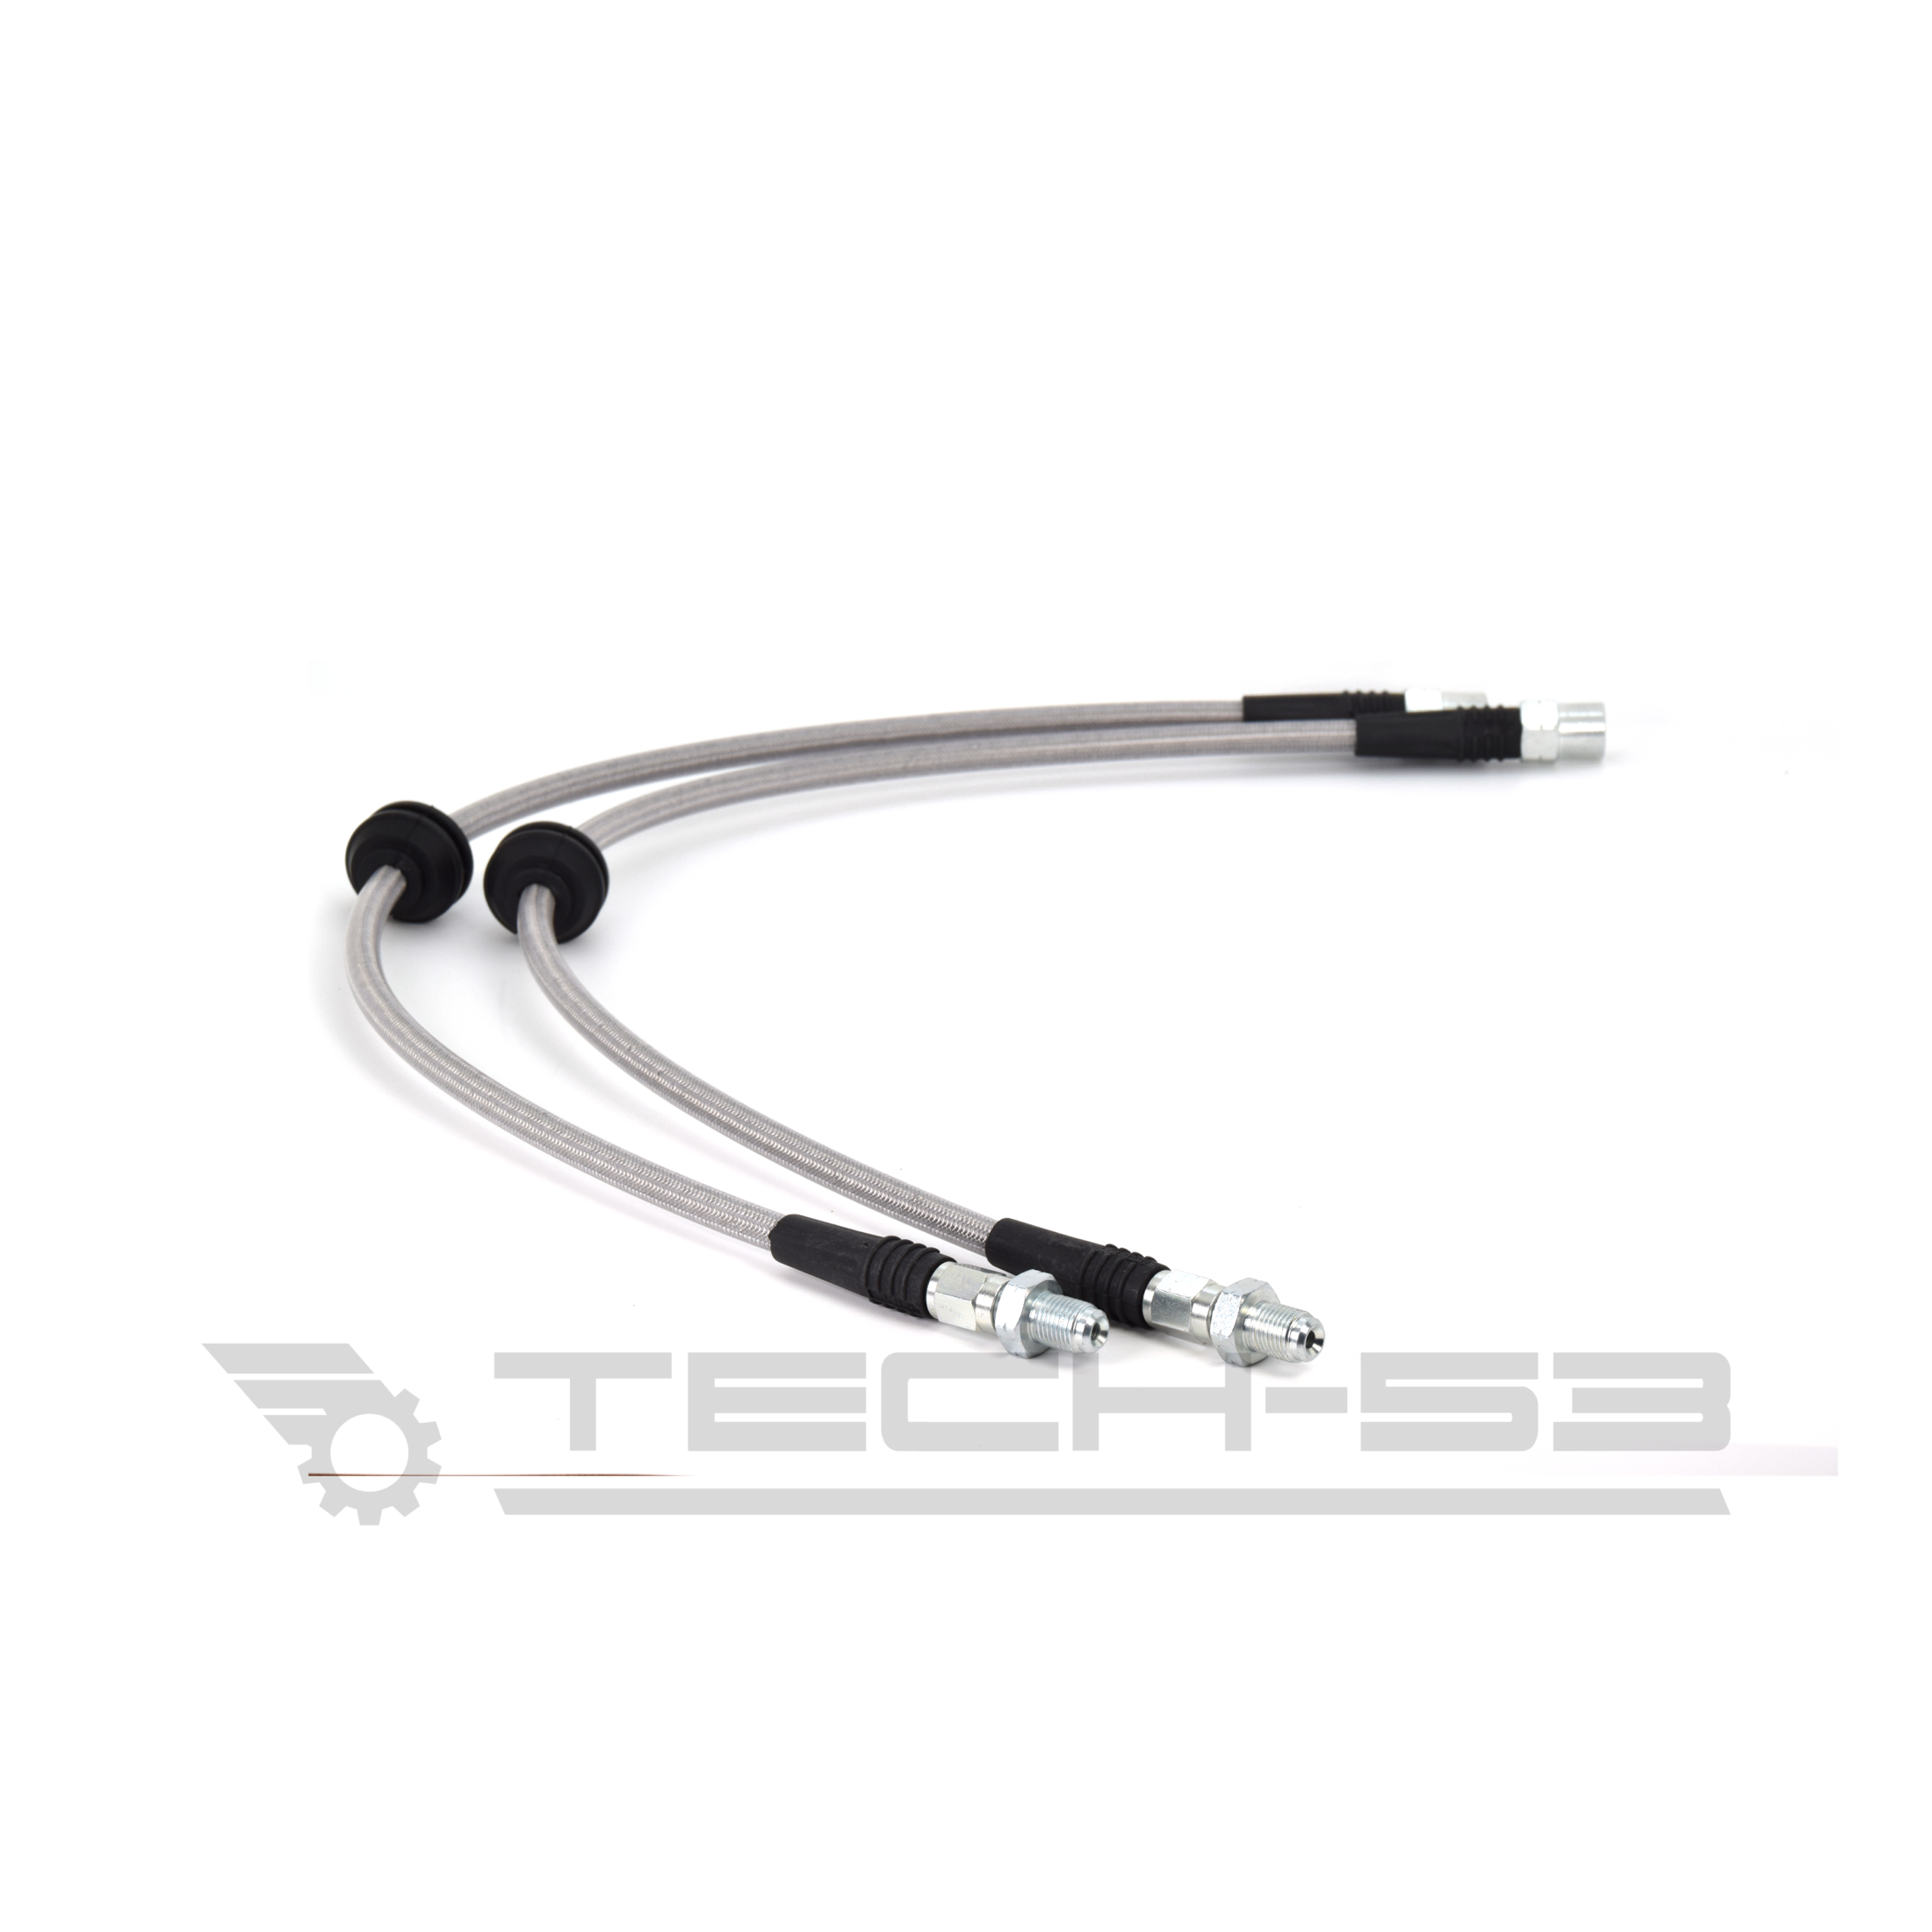 BMW E46 320I 323I 325I 325CI 328I 328CI 330I 330CI FRONT BRAKE LINE UPGRADE STAINLESS STEEL BRAIDED TRACK